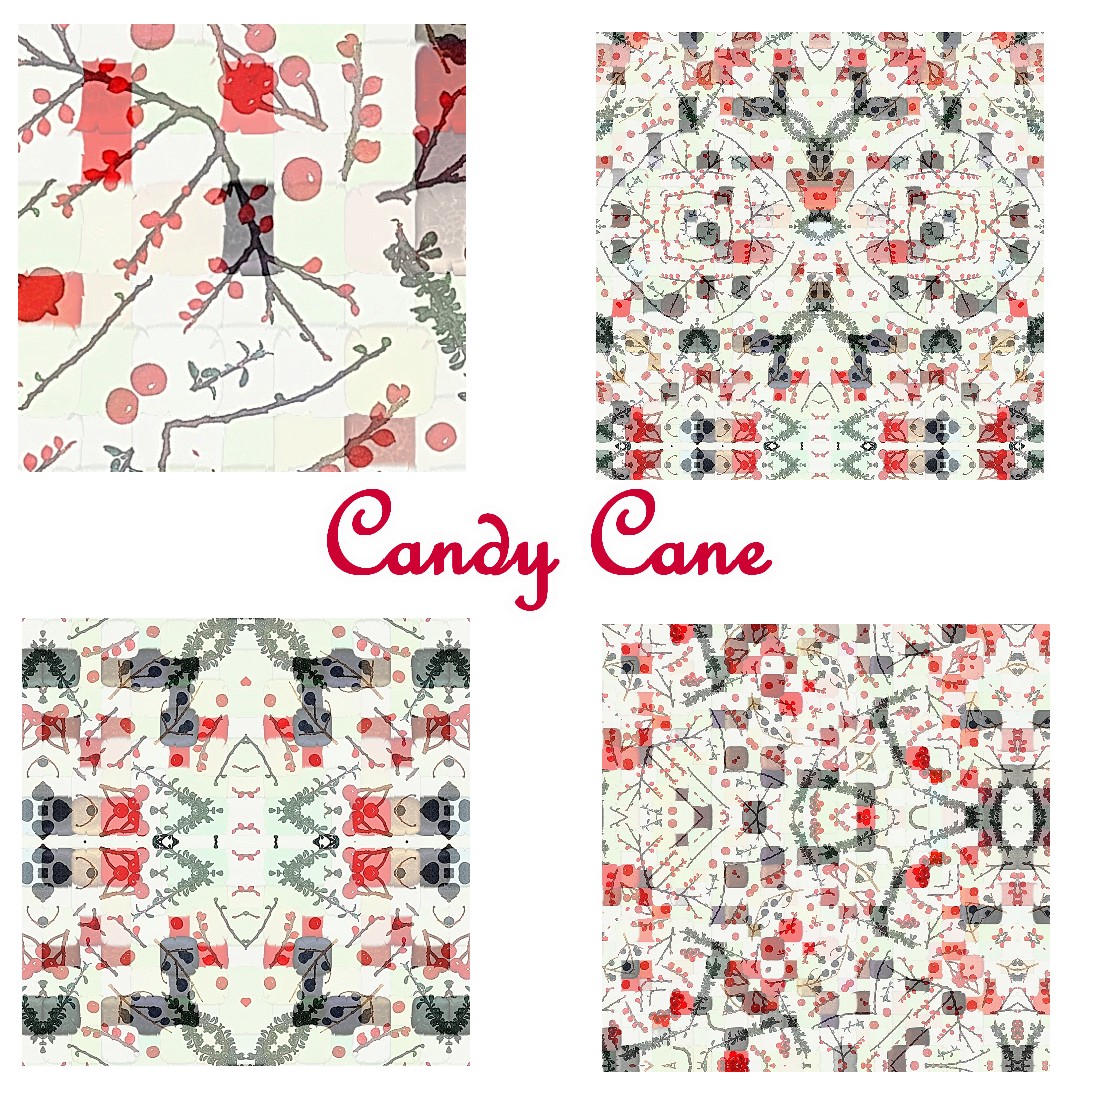 Watercolor Candy Cane Digital Paper Design cover image.